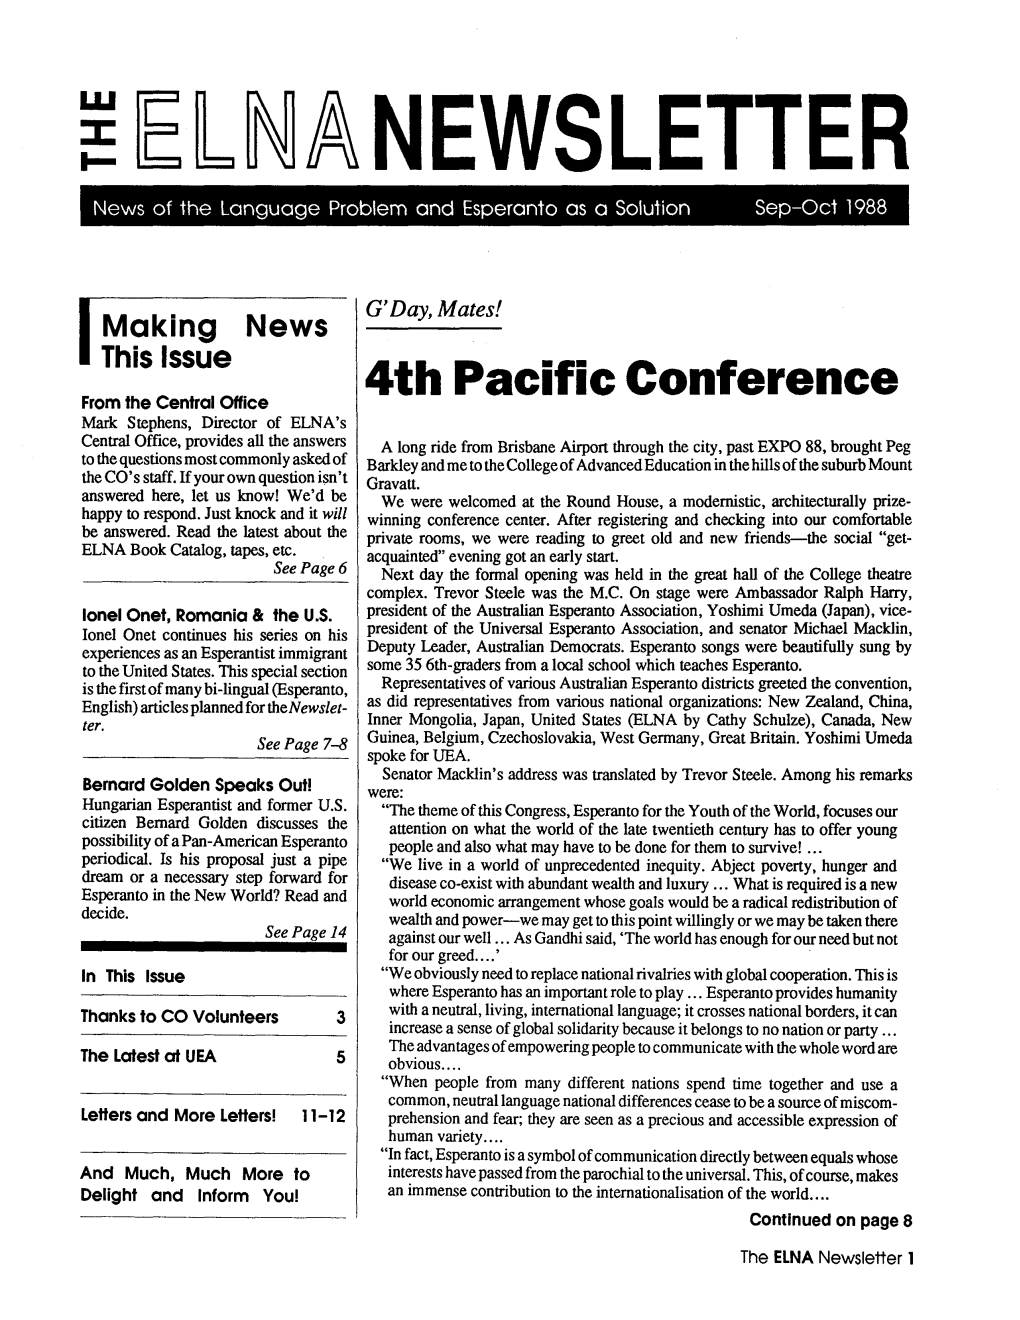 ~[El~ANEWSLETTER News of the Language Problem and Esperanto As 0 Solution Sep-Oct 1988